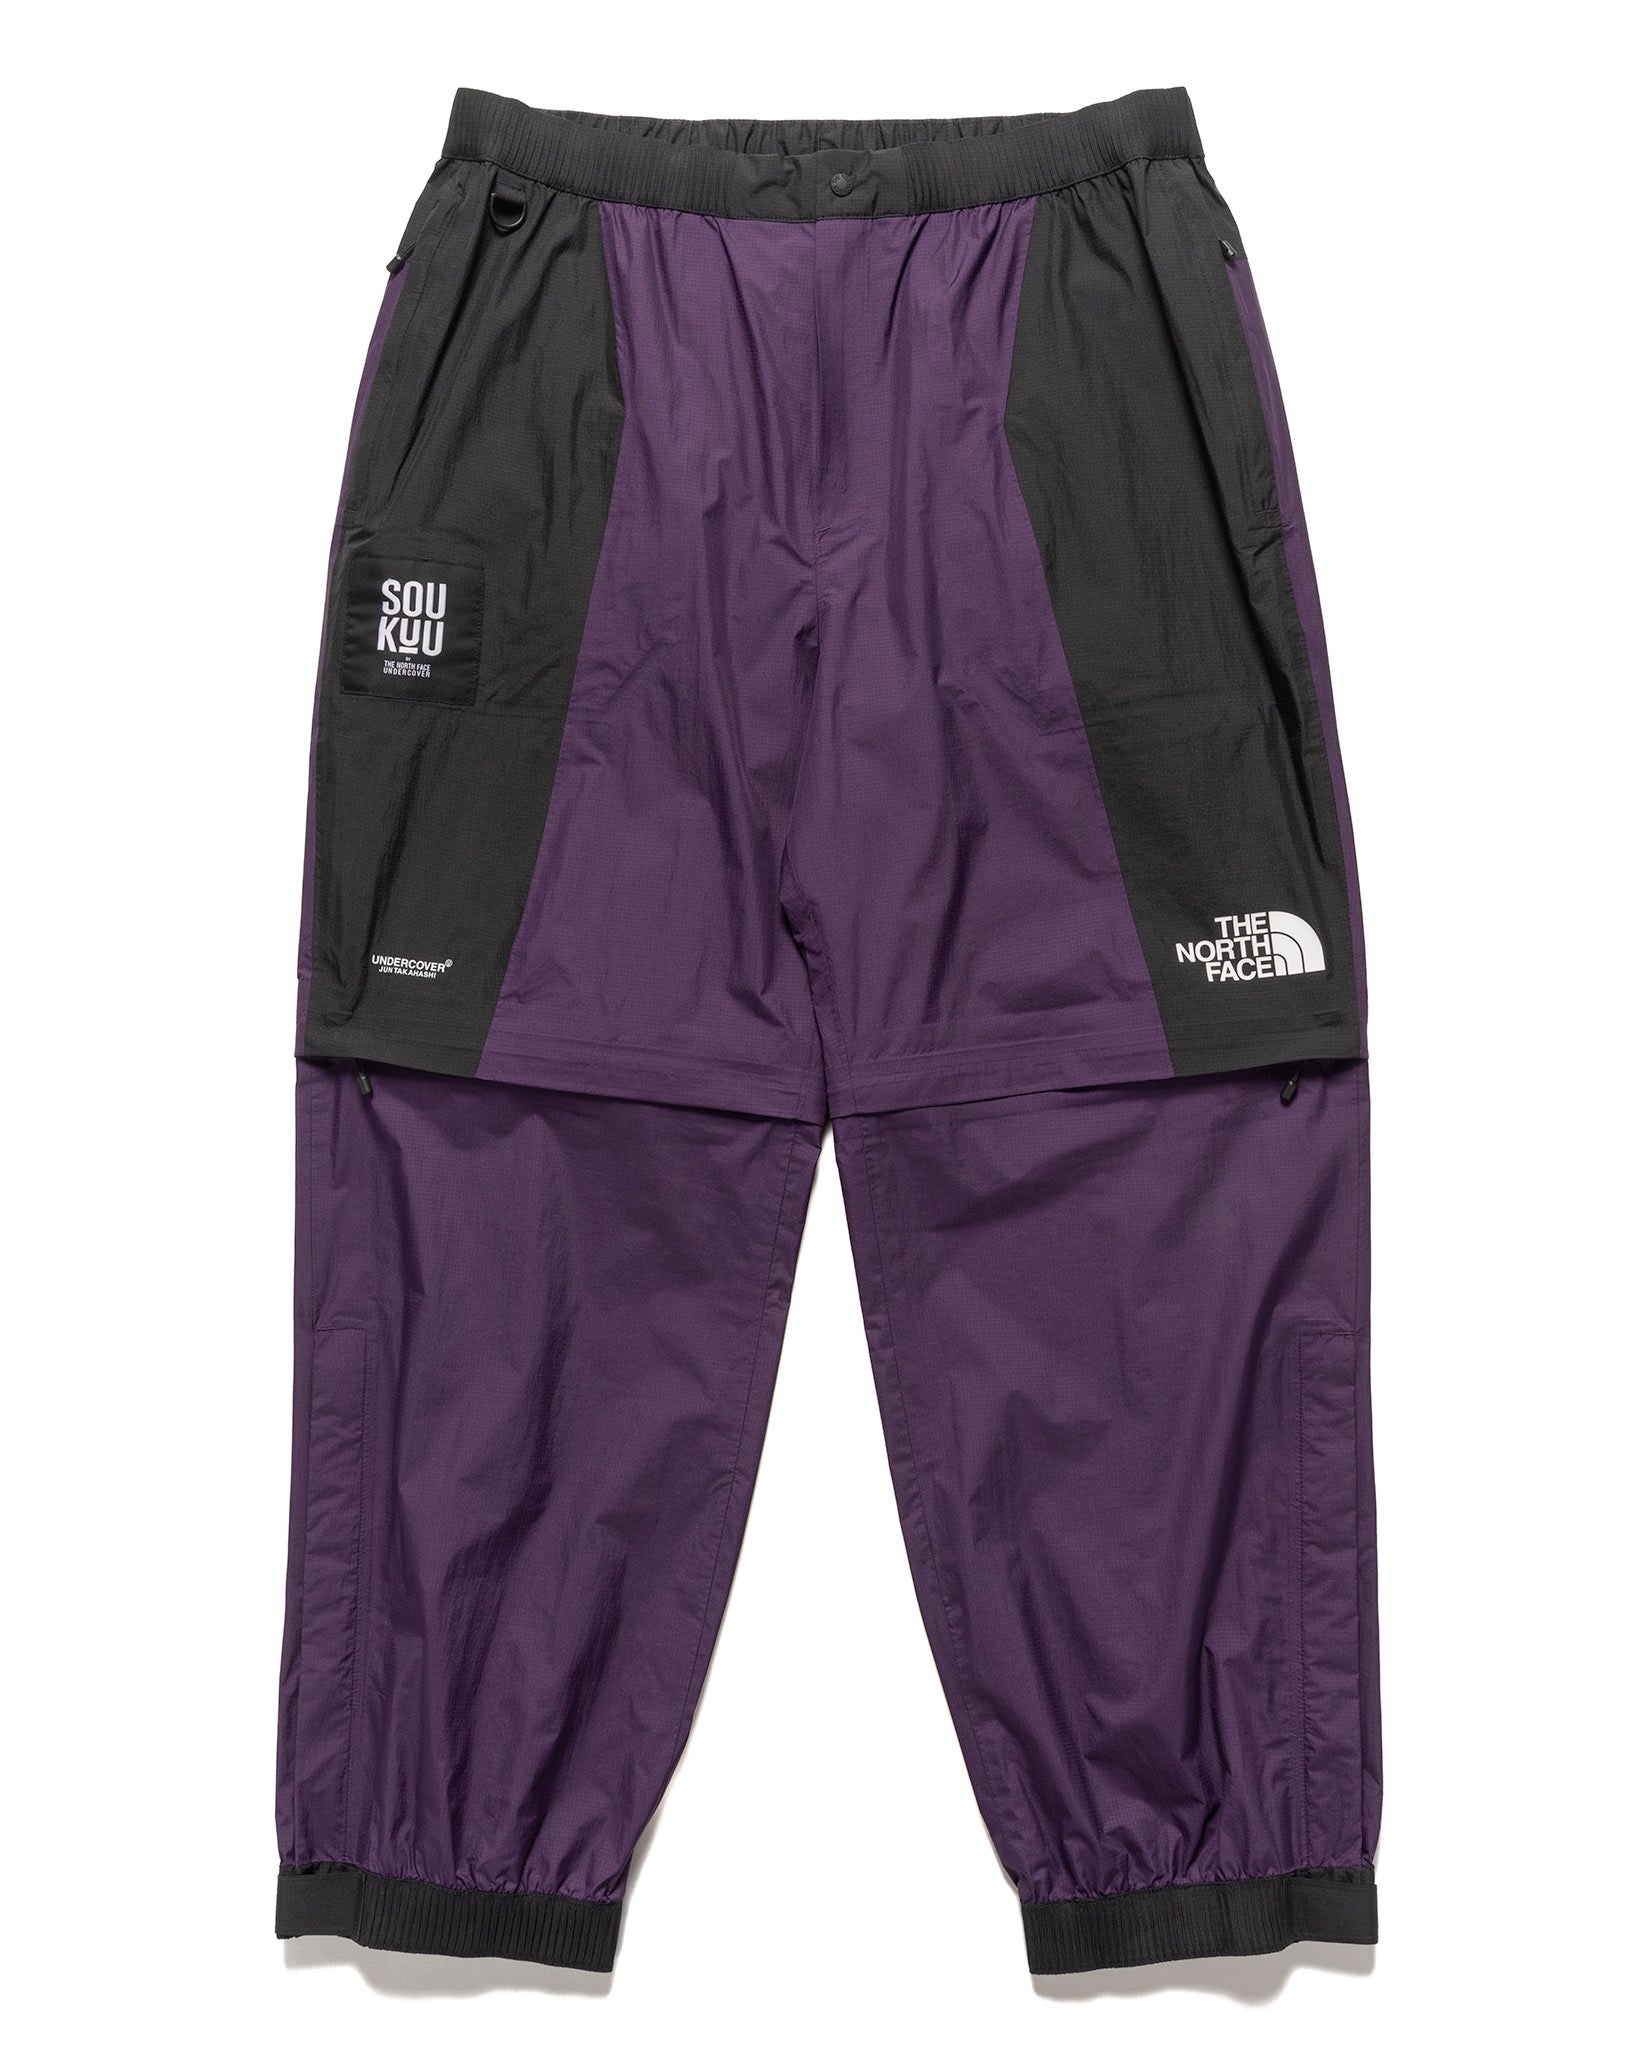 x Undercover SOUKUU Hike Convertible Shell Pant Purple Pennant - 1